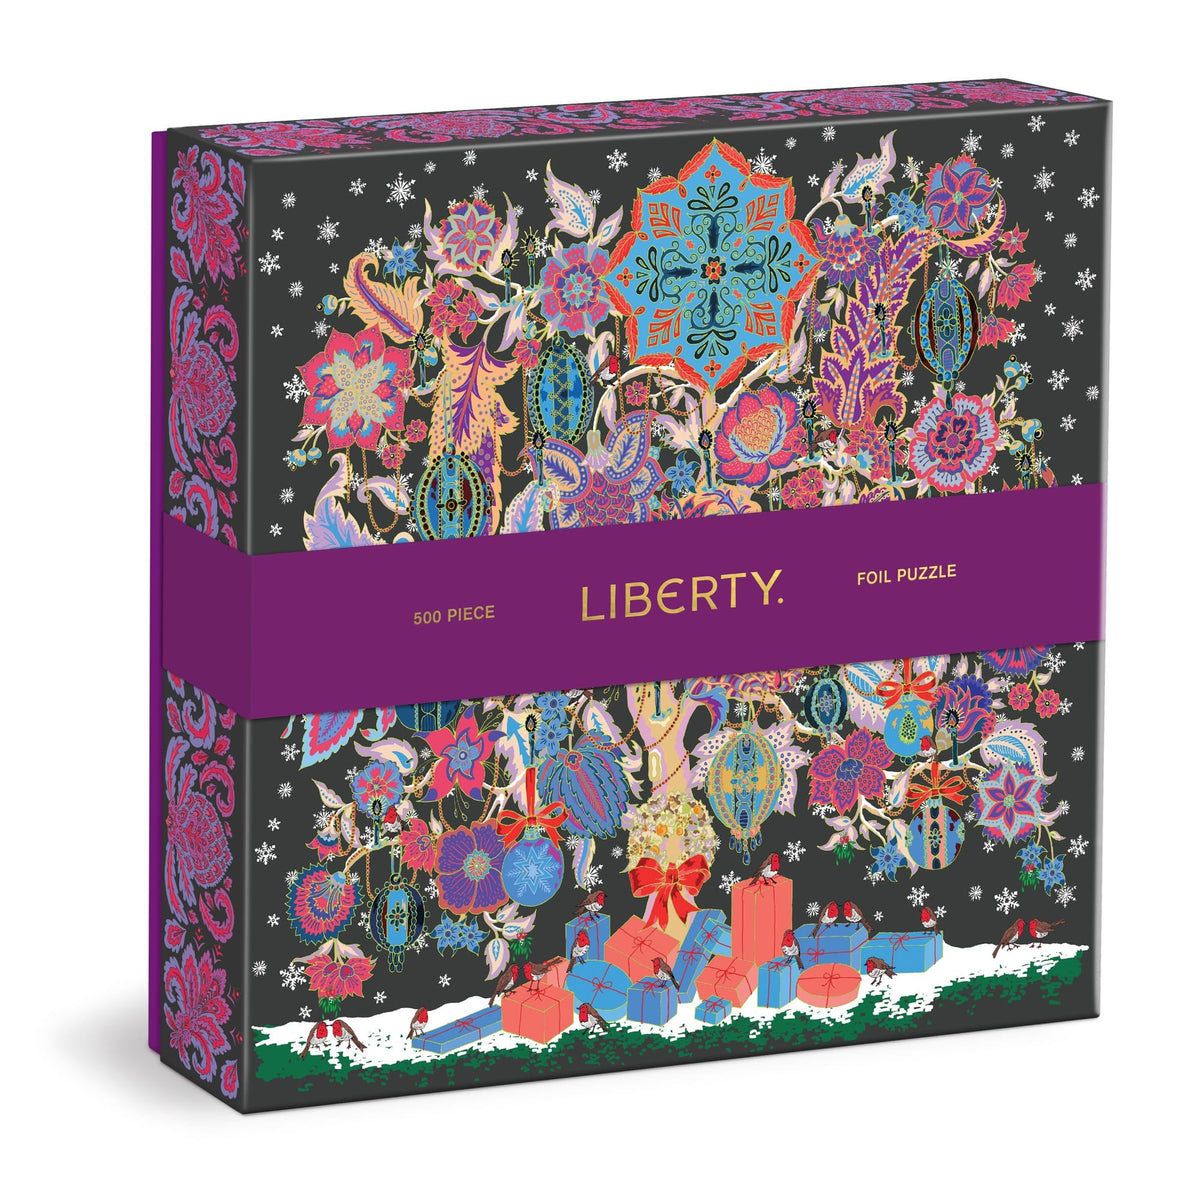 liberty-christmas-tree-of-life-500-piece-foil-puzzle-500-piece-puzzles-liberty-of-london-ltd-919831